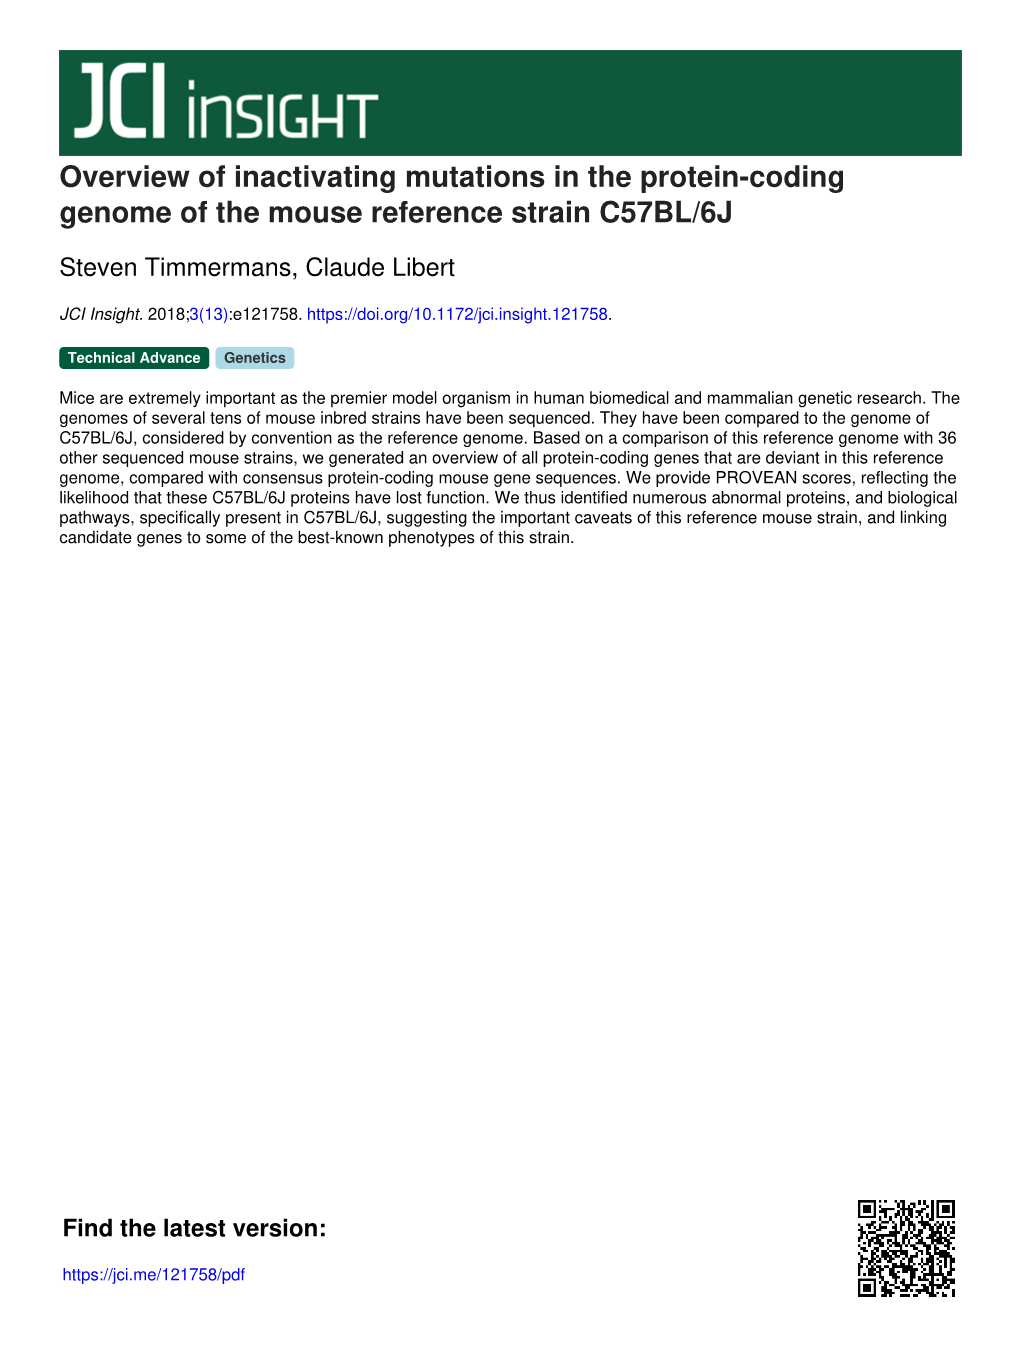 Overview of Inactivating Mutations in the Protein-Coding Genome of the Mouse Reference Strain C57BL/6J